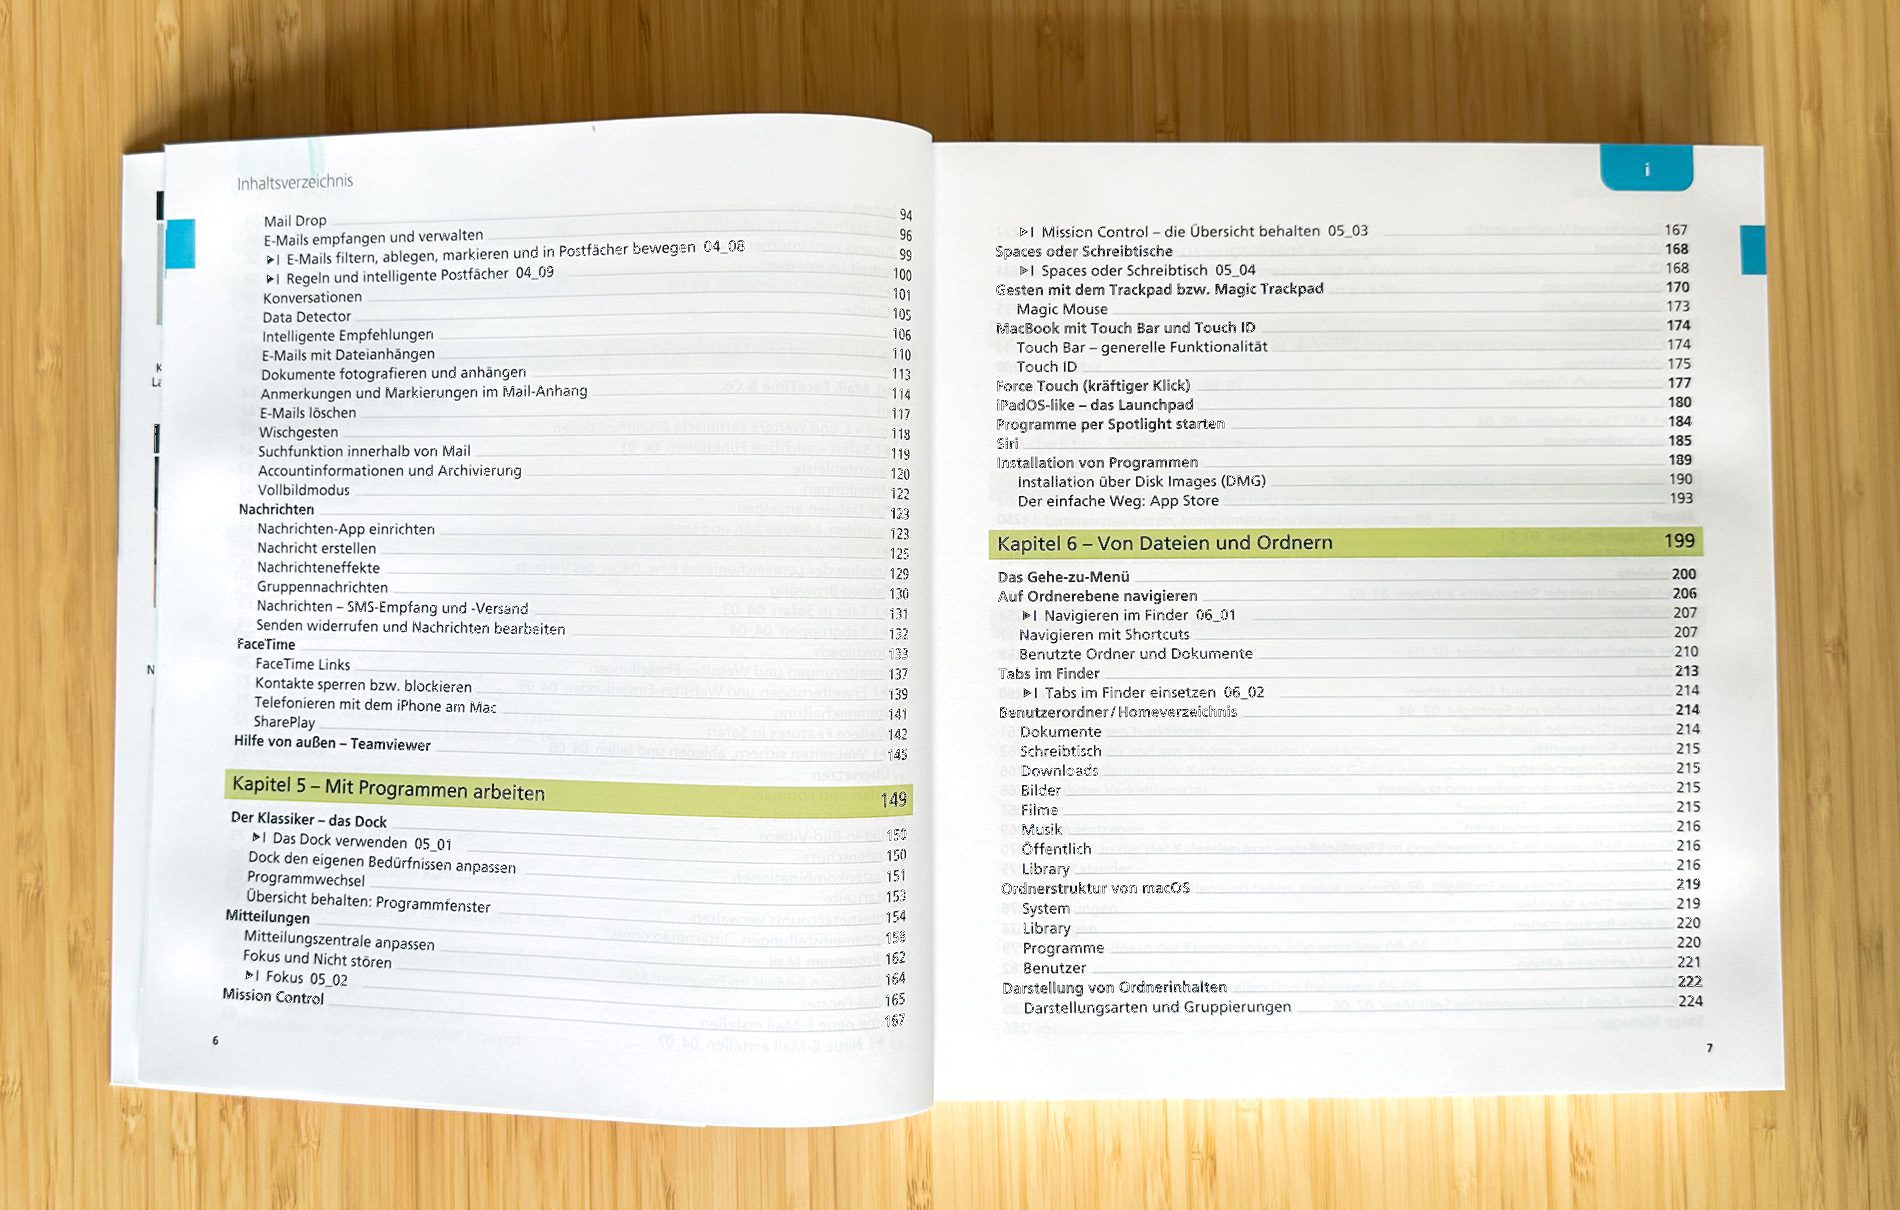 The table of contents covers all areas that are important for novice and advanced Mac users.